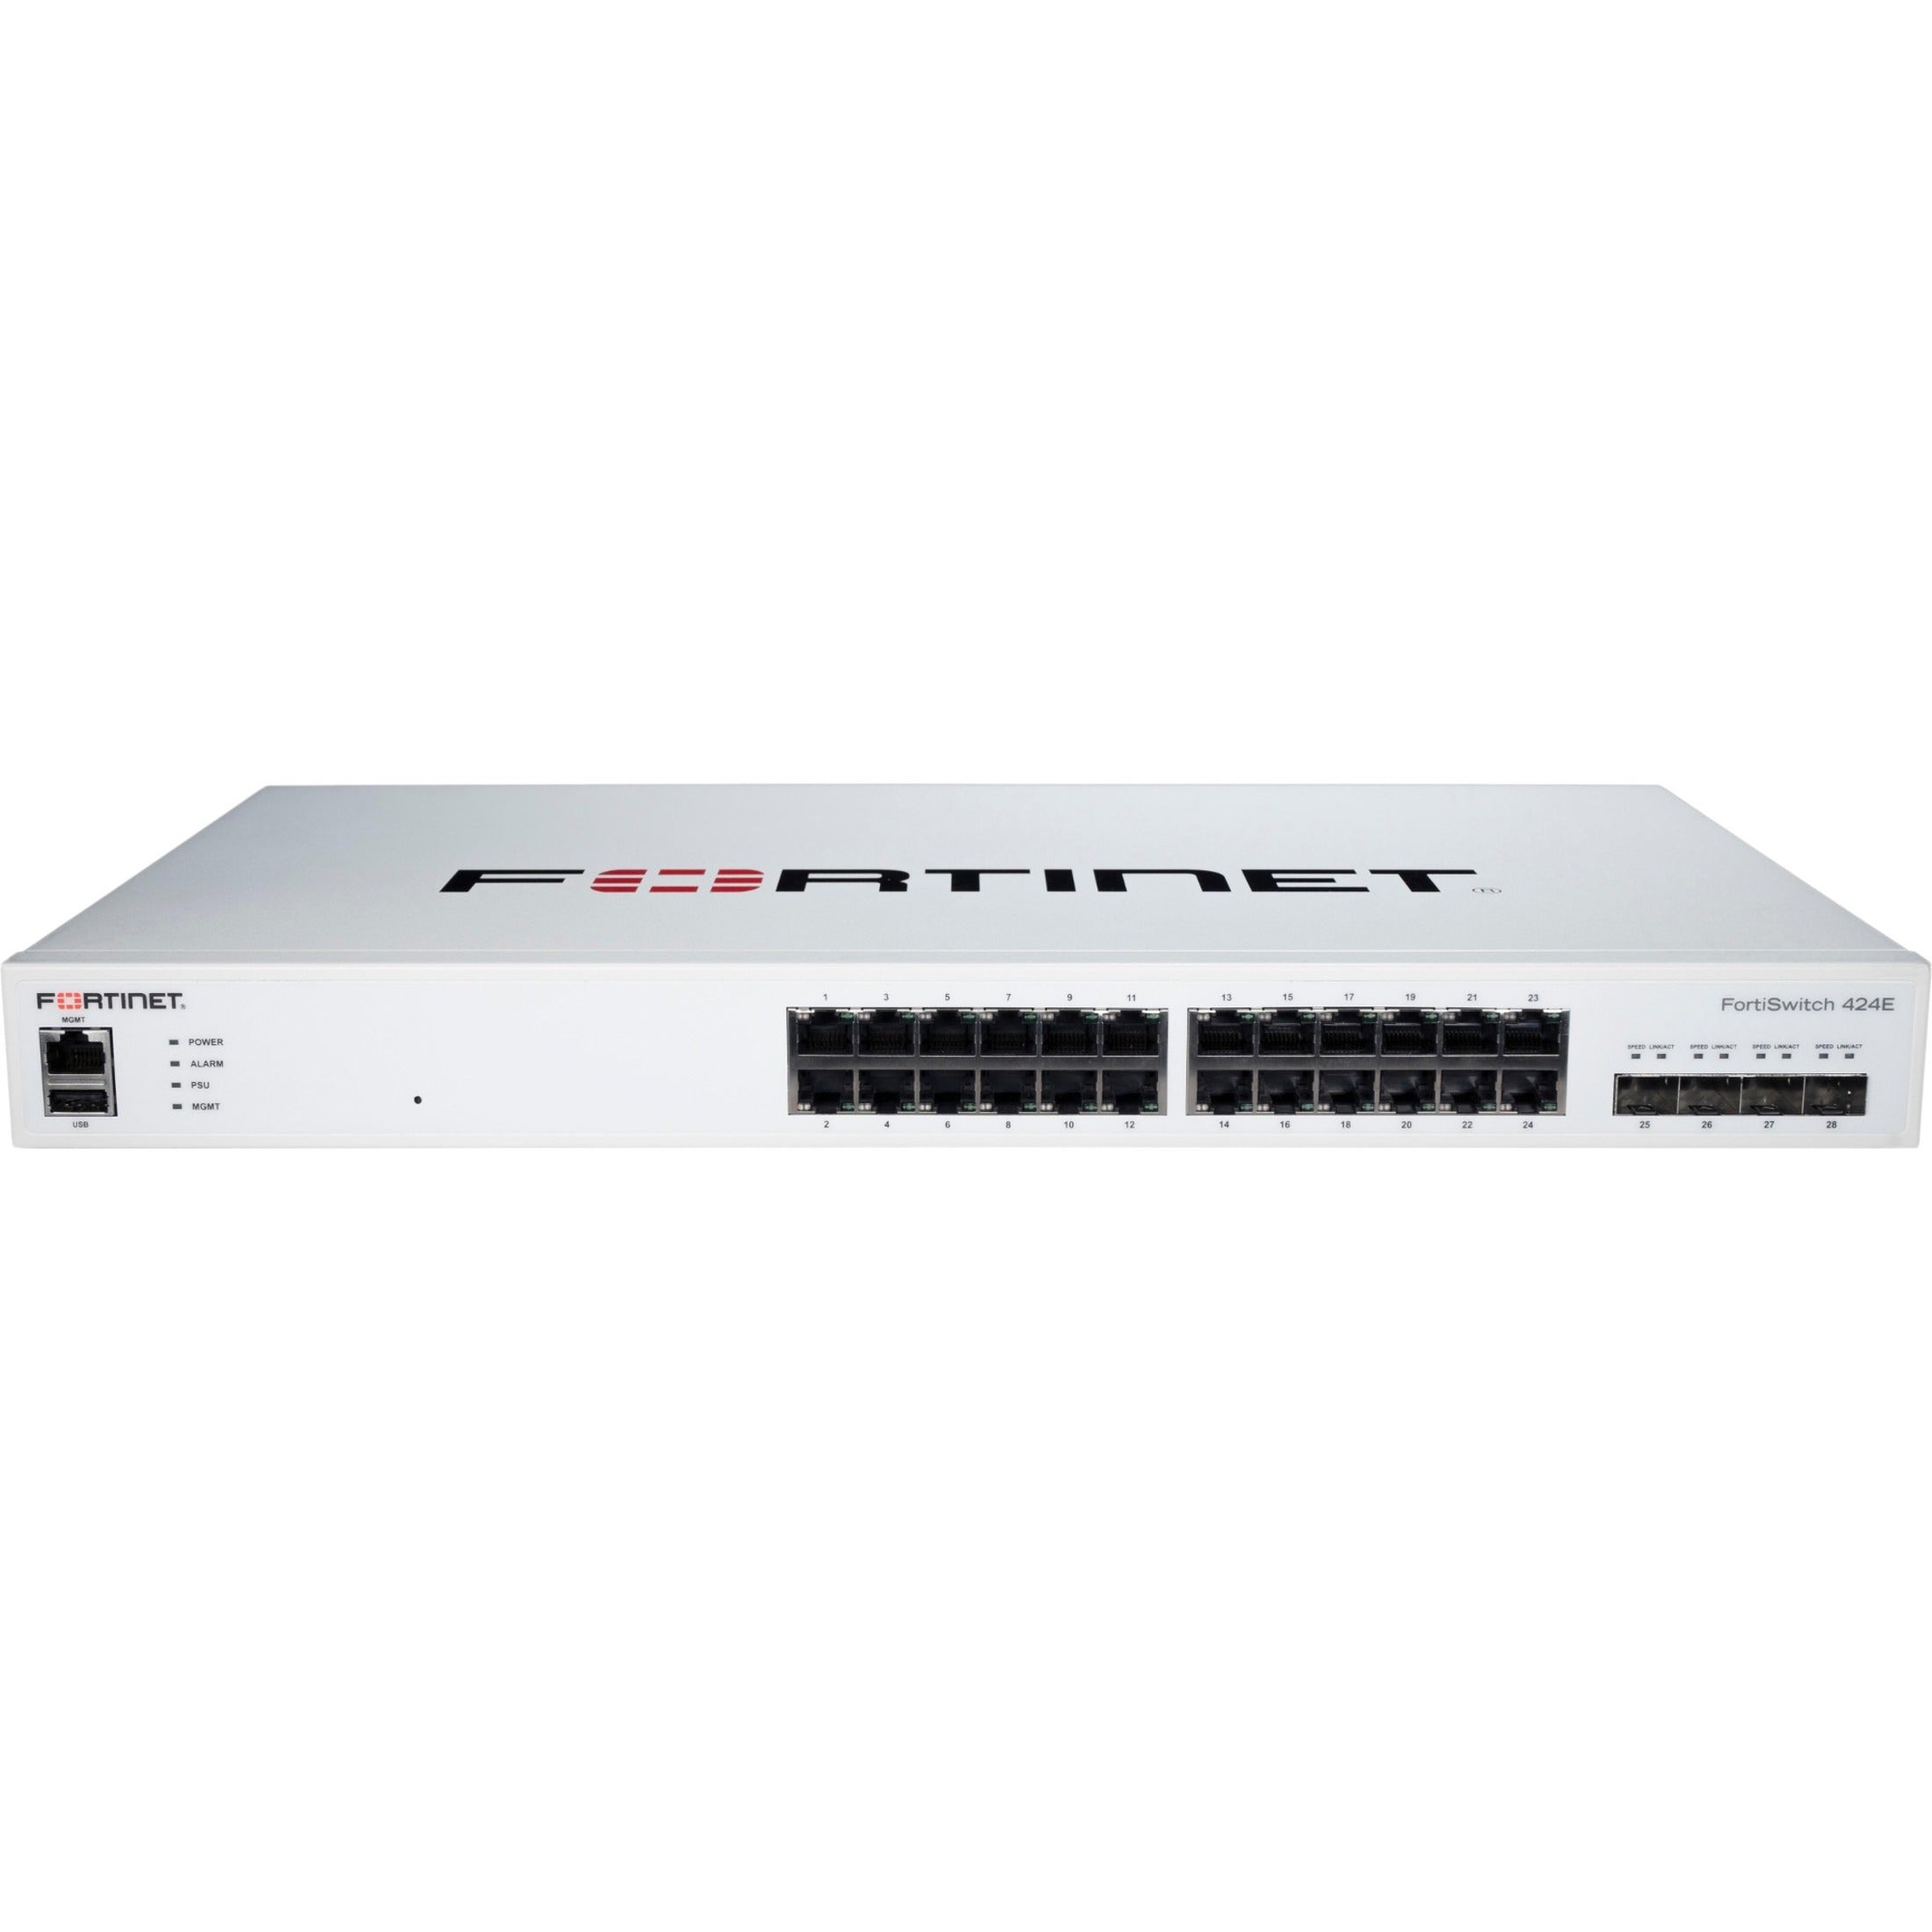 Fortinet FS-424E FortiSwitch Layer 3 Switch, 24 Port Gigabit Ethernet, 4 Port 10 Gigabit Ethernet Expansion Slot